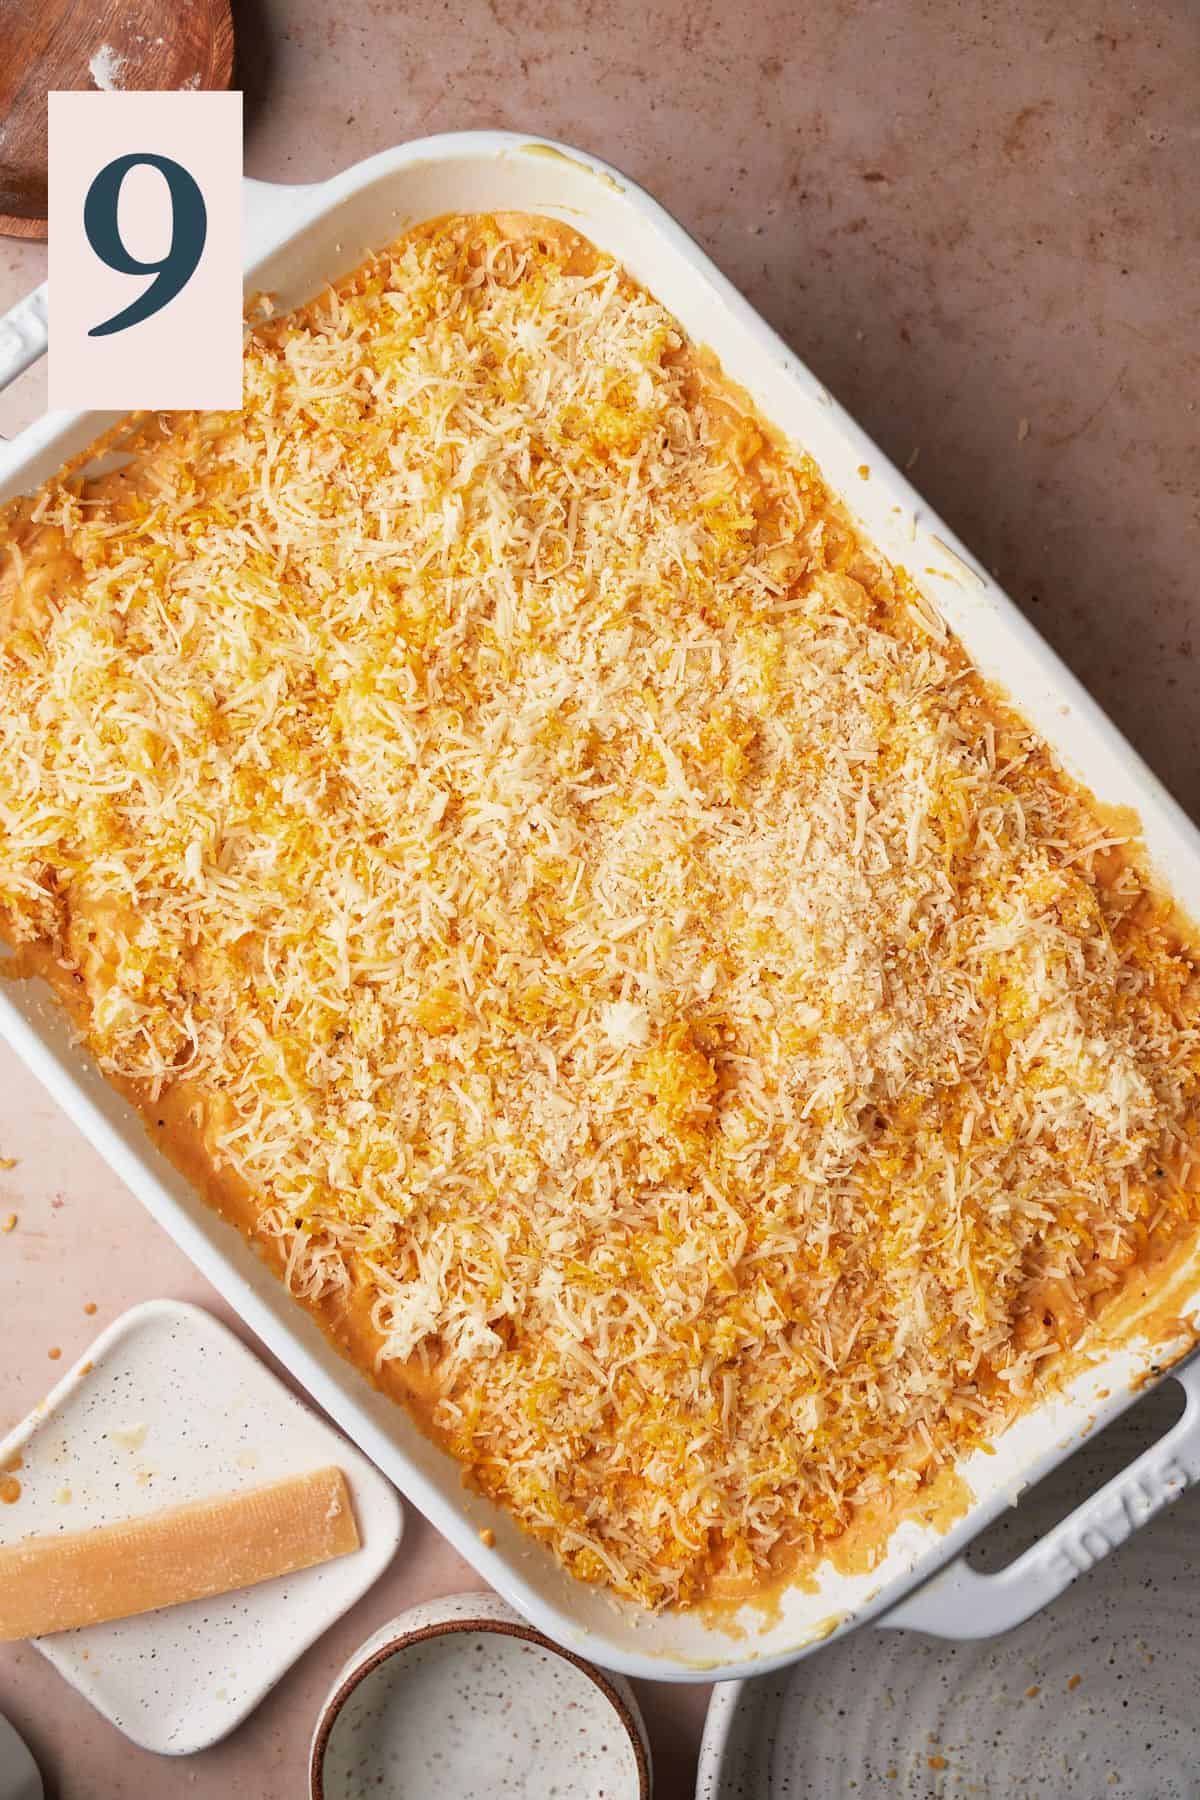 Cheese sauce and macaroni topped with remaining cheese before being baked.